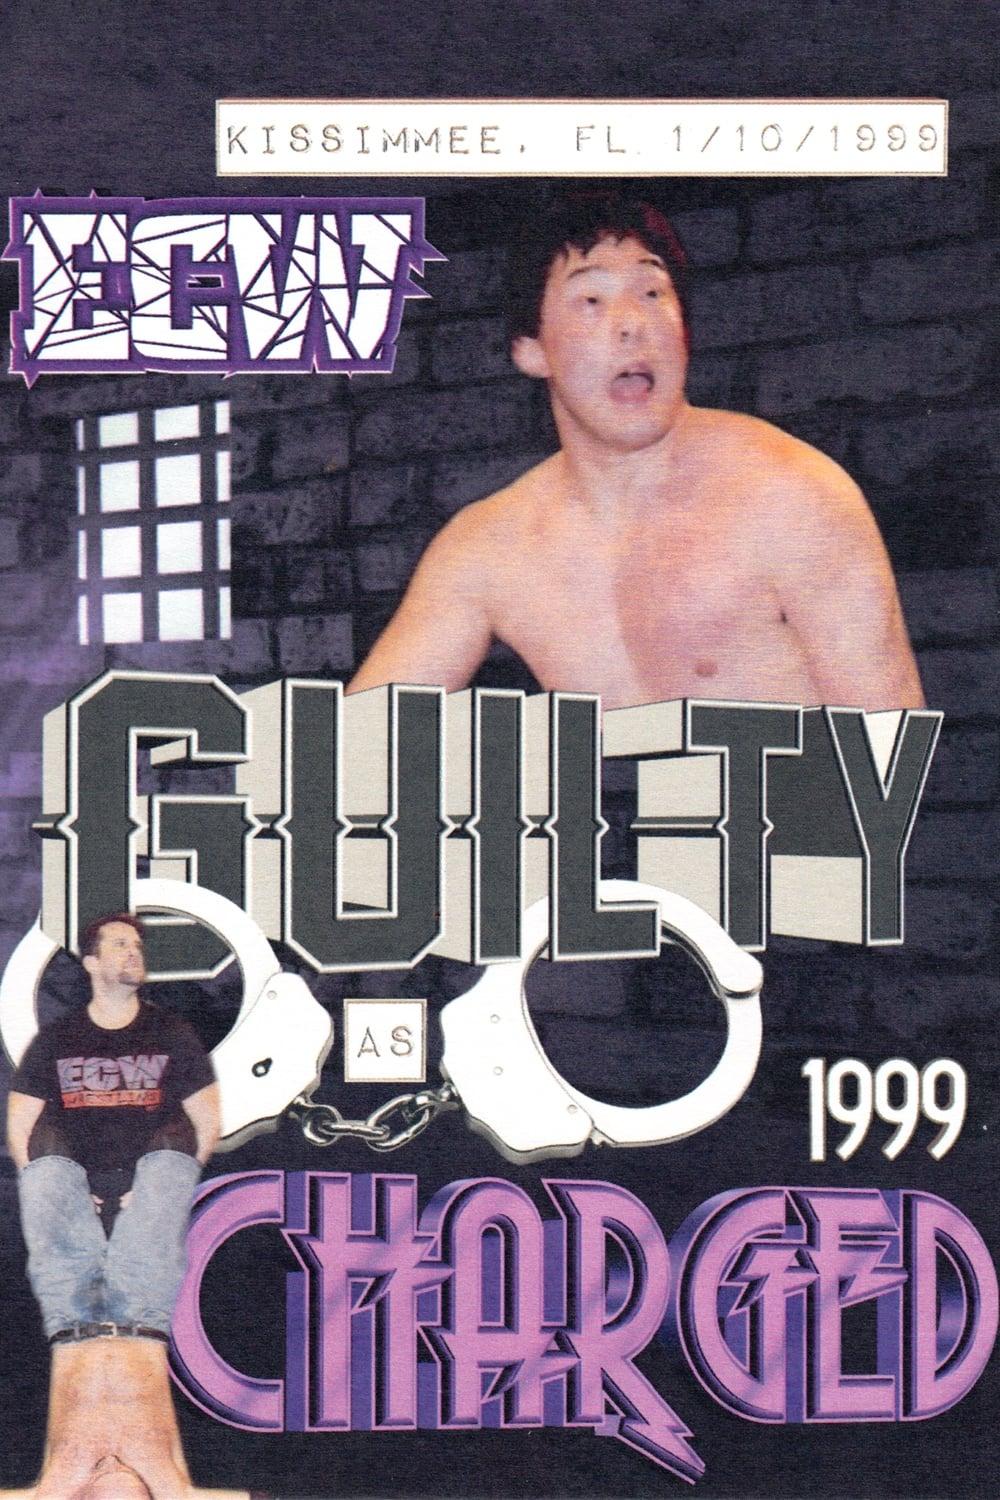 ECW Guilty as Charged 1999 poster